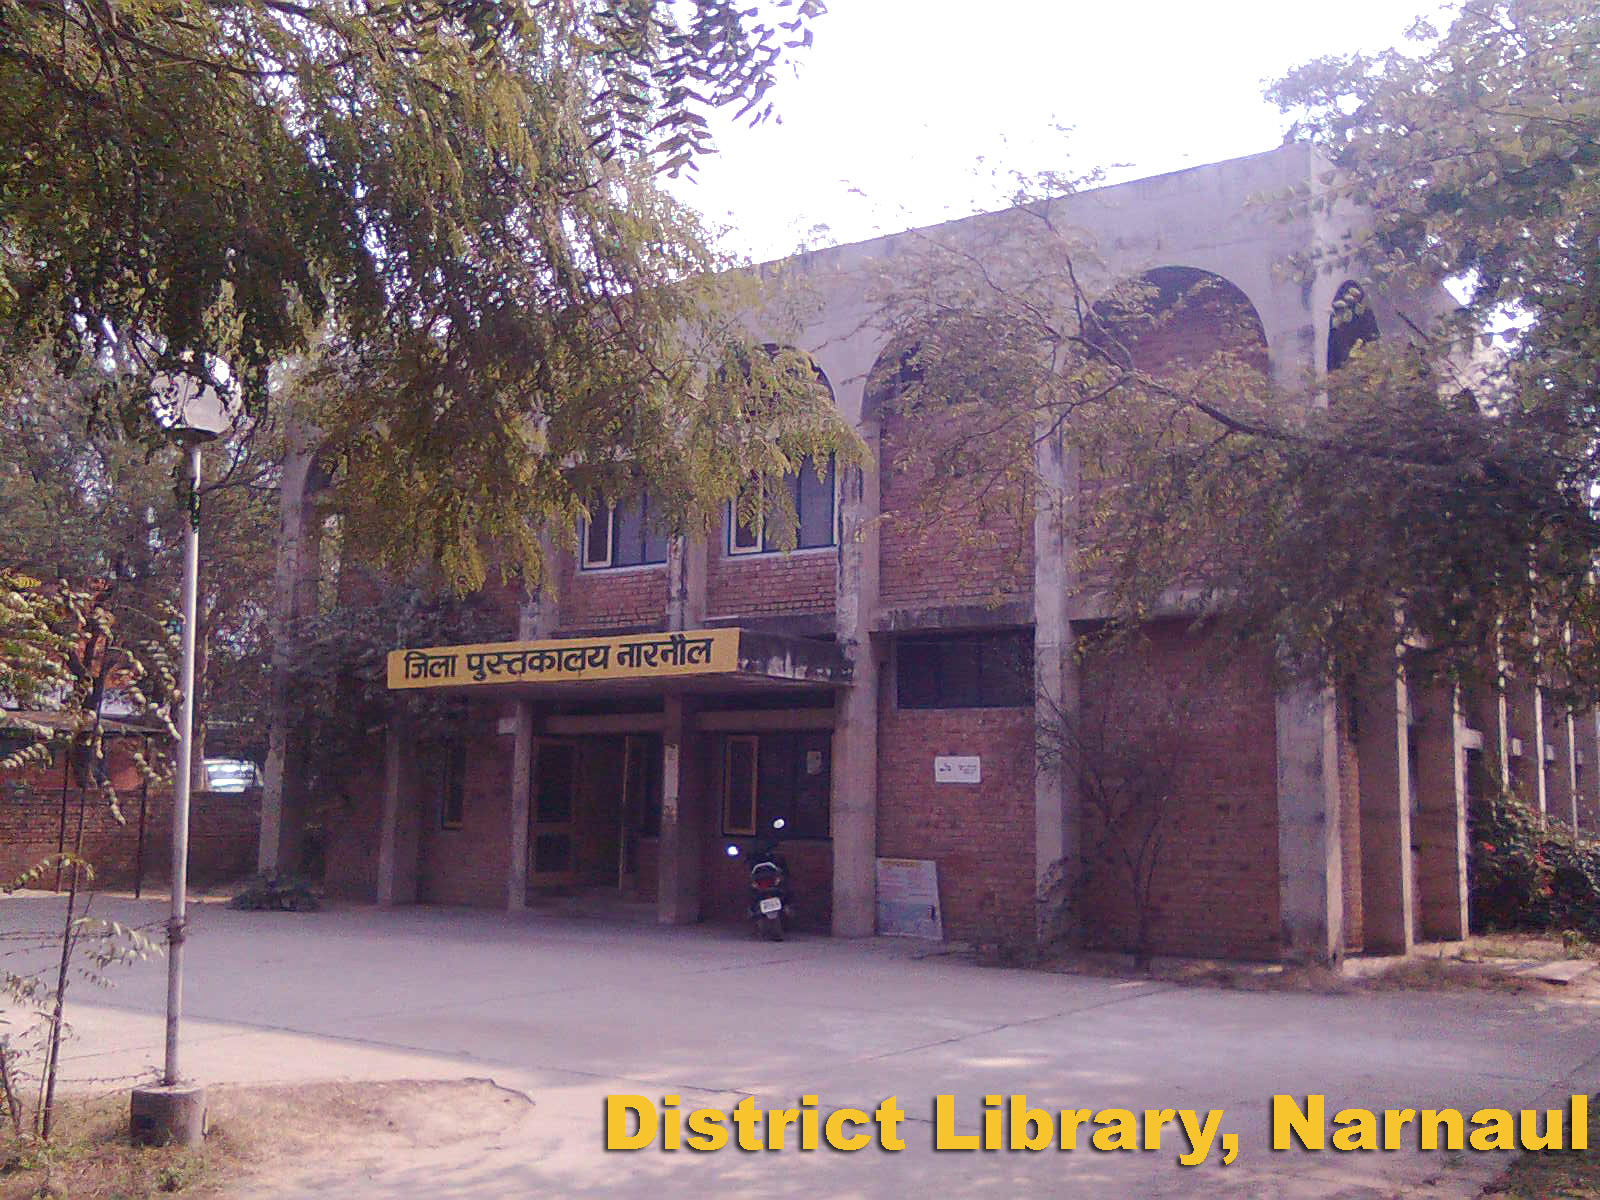 District Library, Narnaul